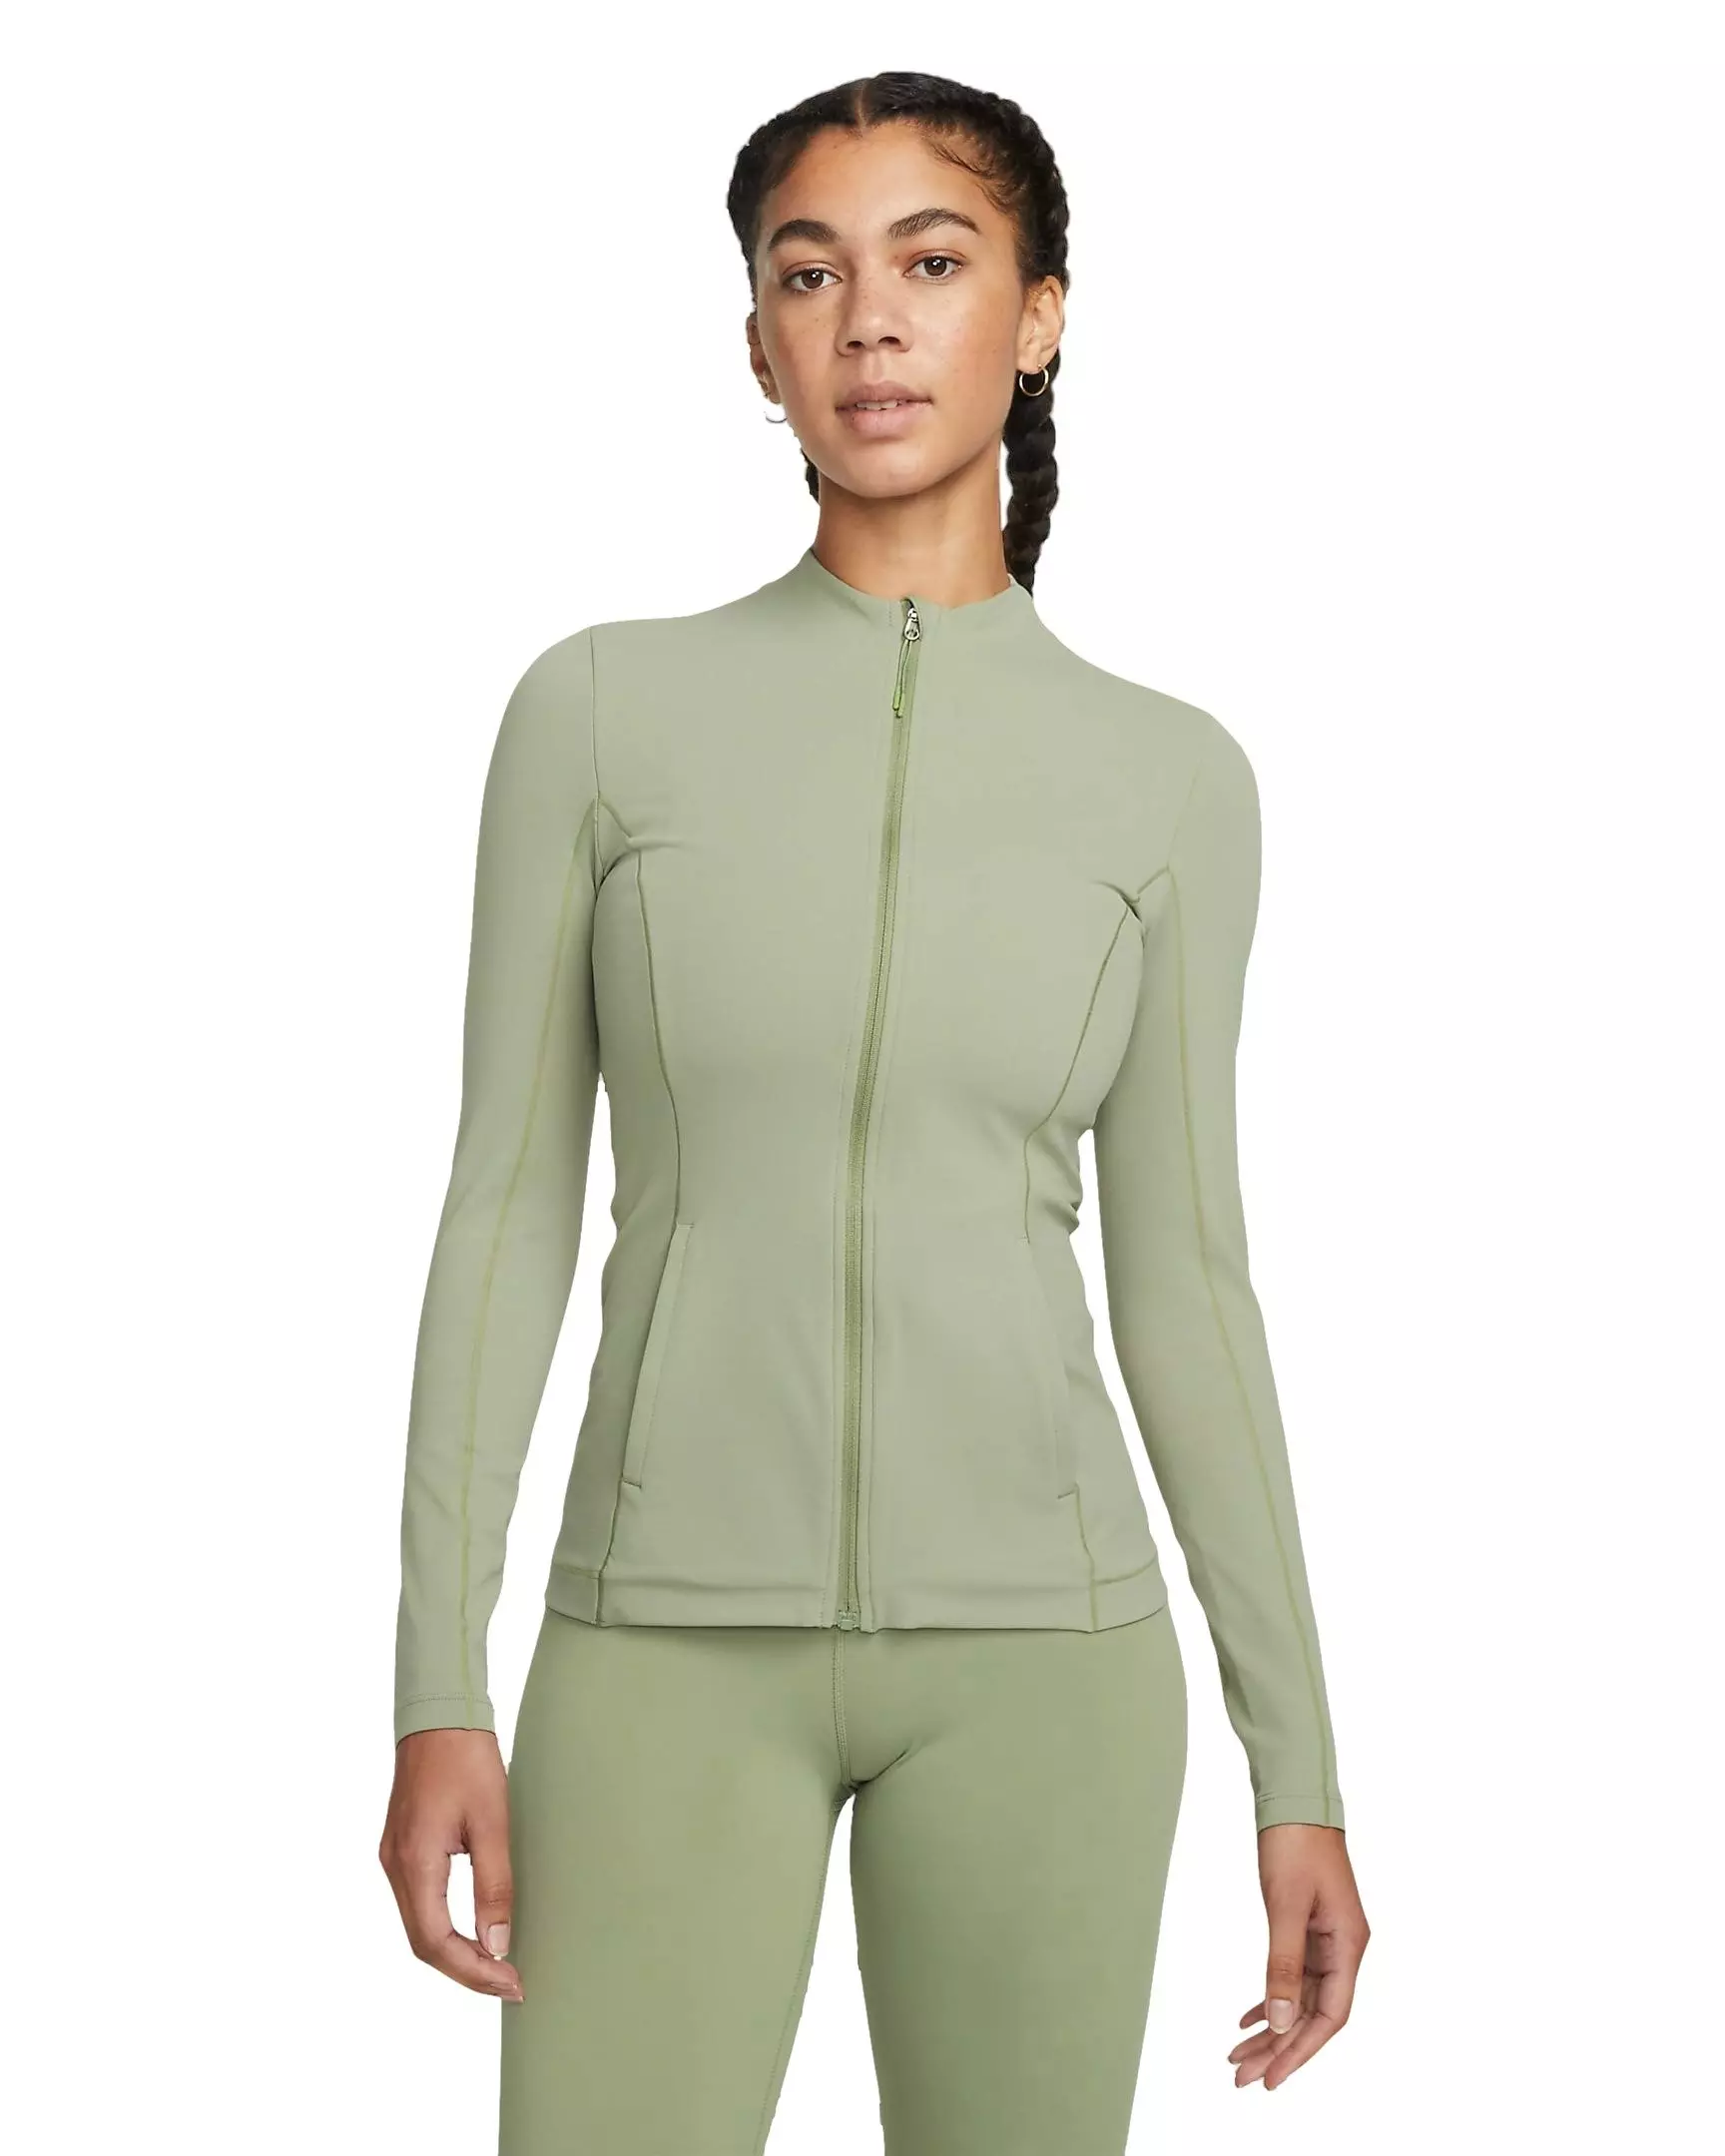 Yoga Dri-FIT Luxe Fitted Jacket